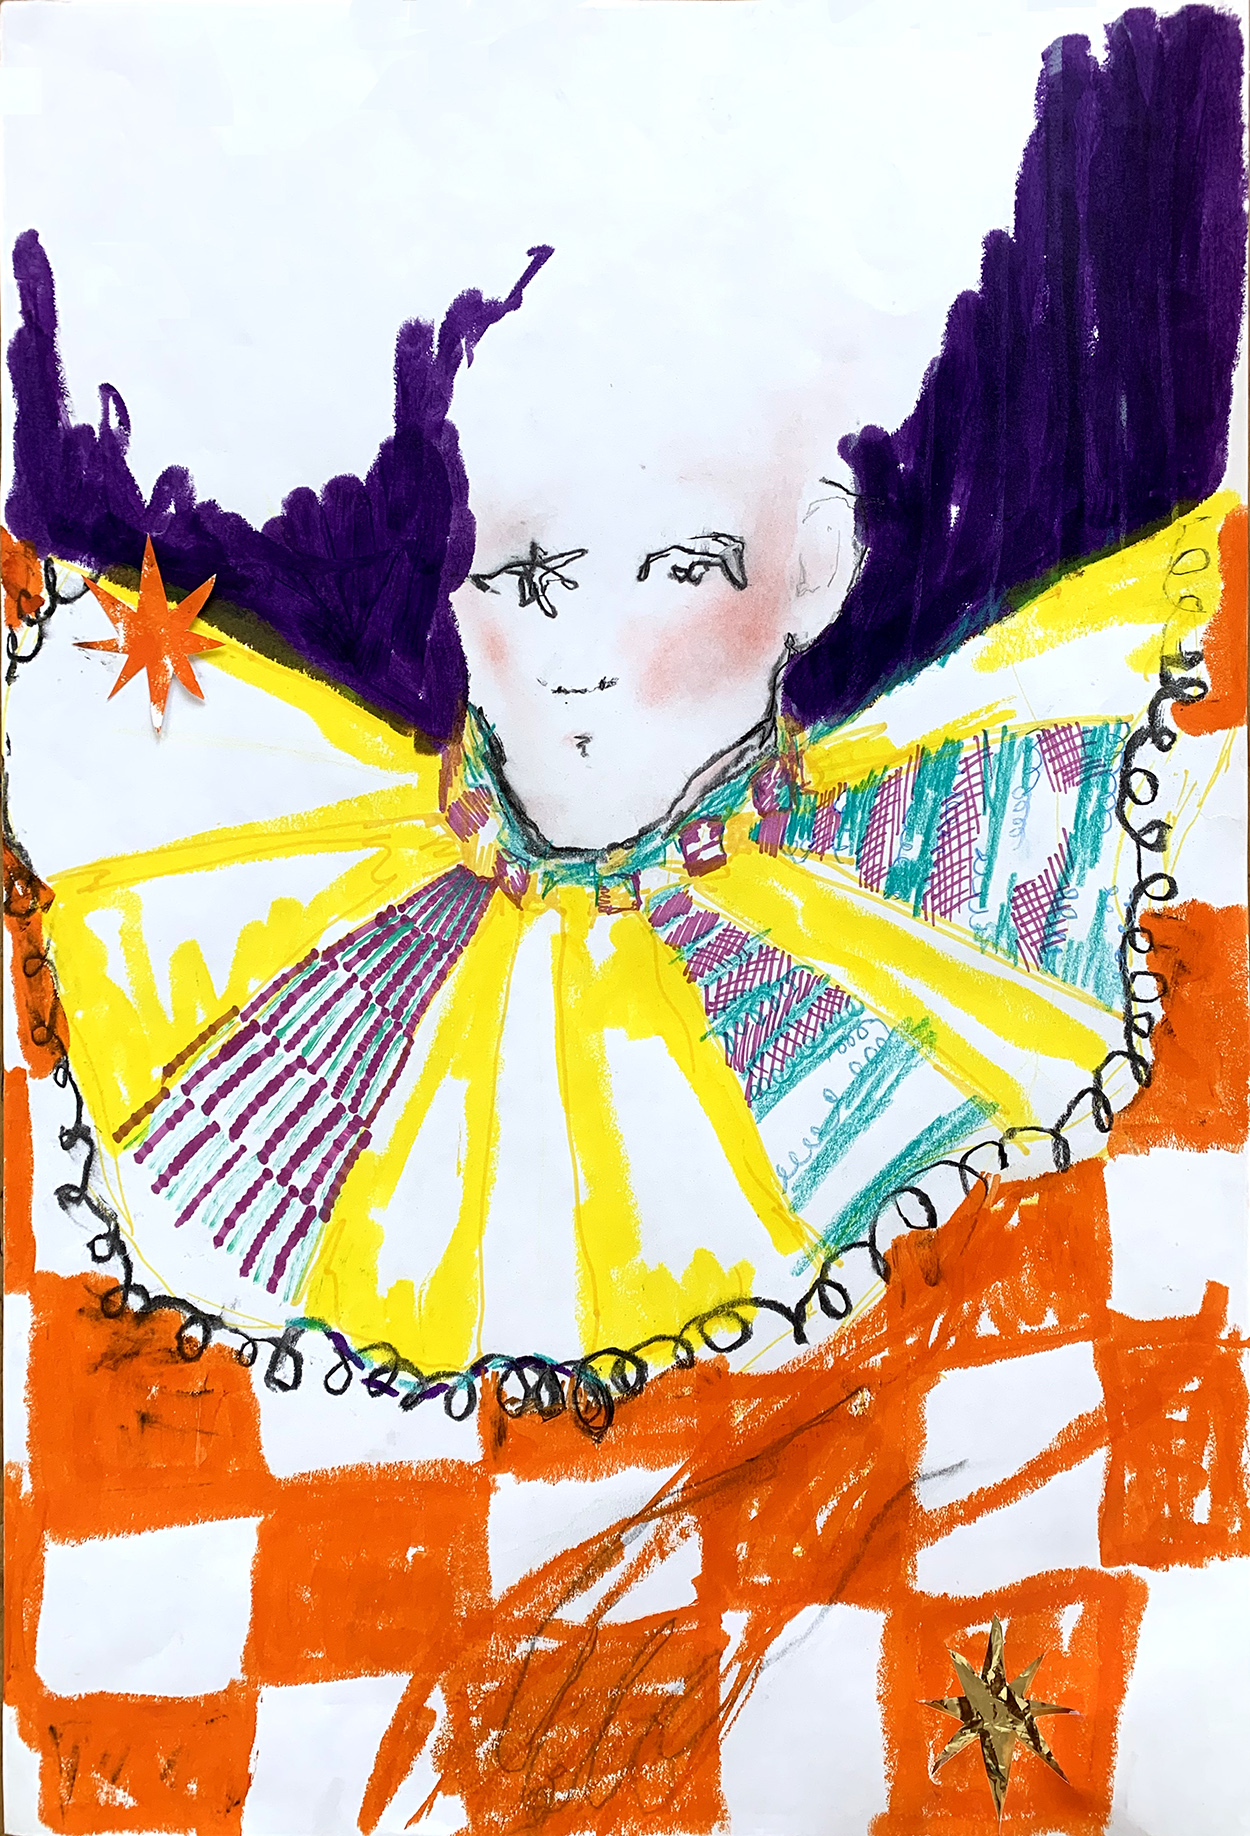 Fashion illustration exploring identity through costumery- Mixed Media. A makeup clad bald person wears a brightly coloured elizabethan ruff with connotations of early clowning, costumery and bizarre maximalism.